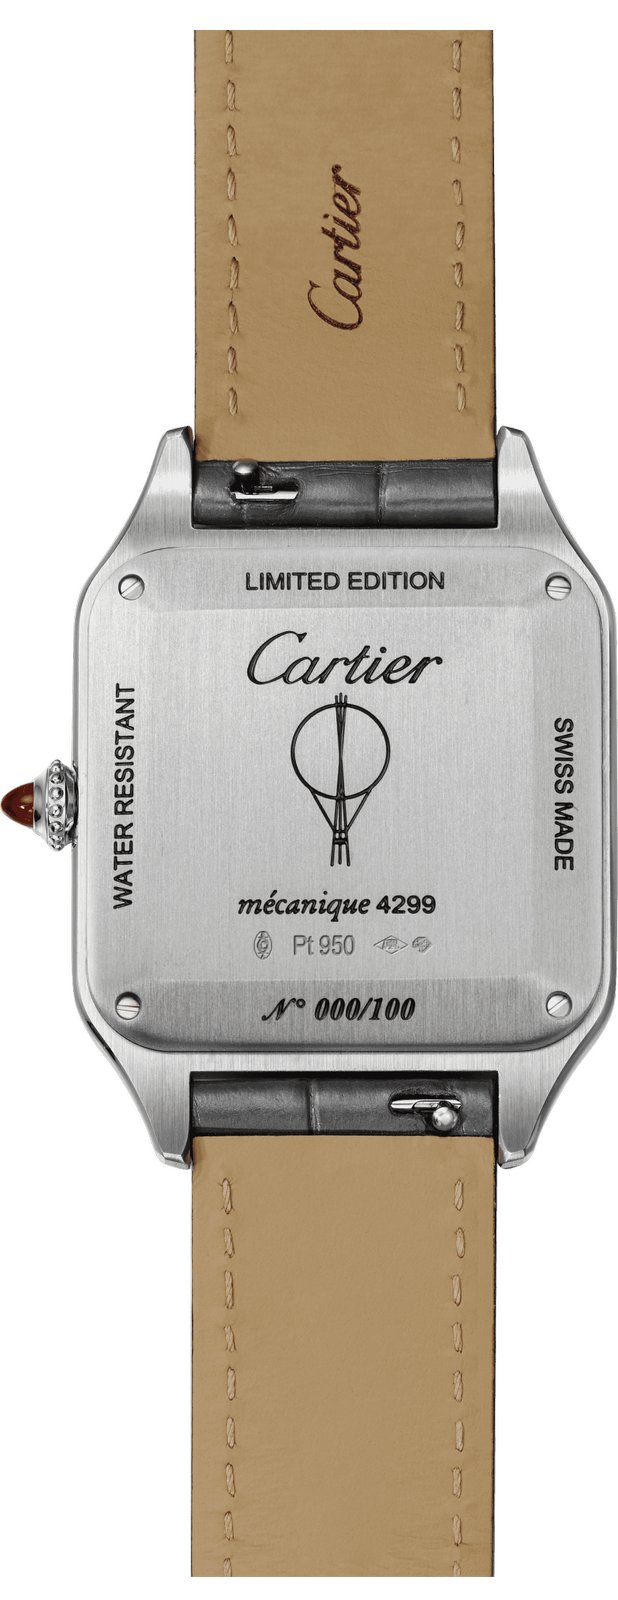 cartier mens watch limited edition